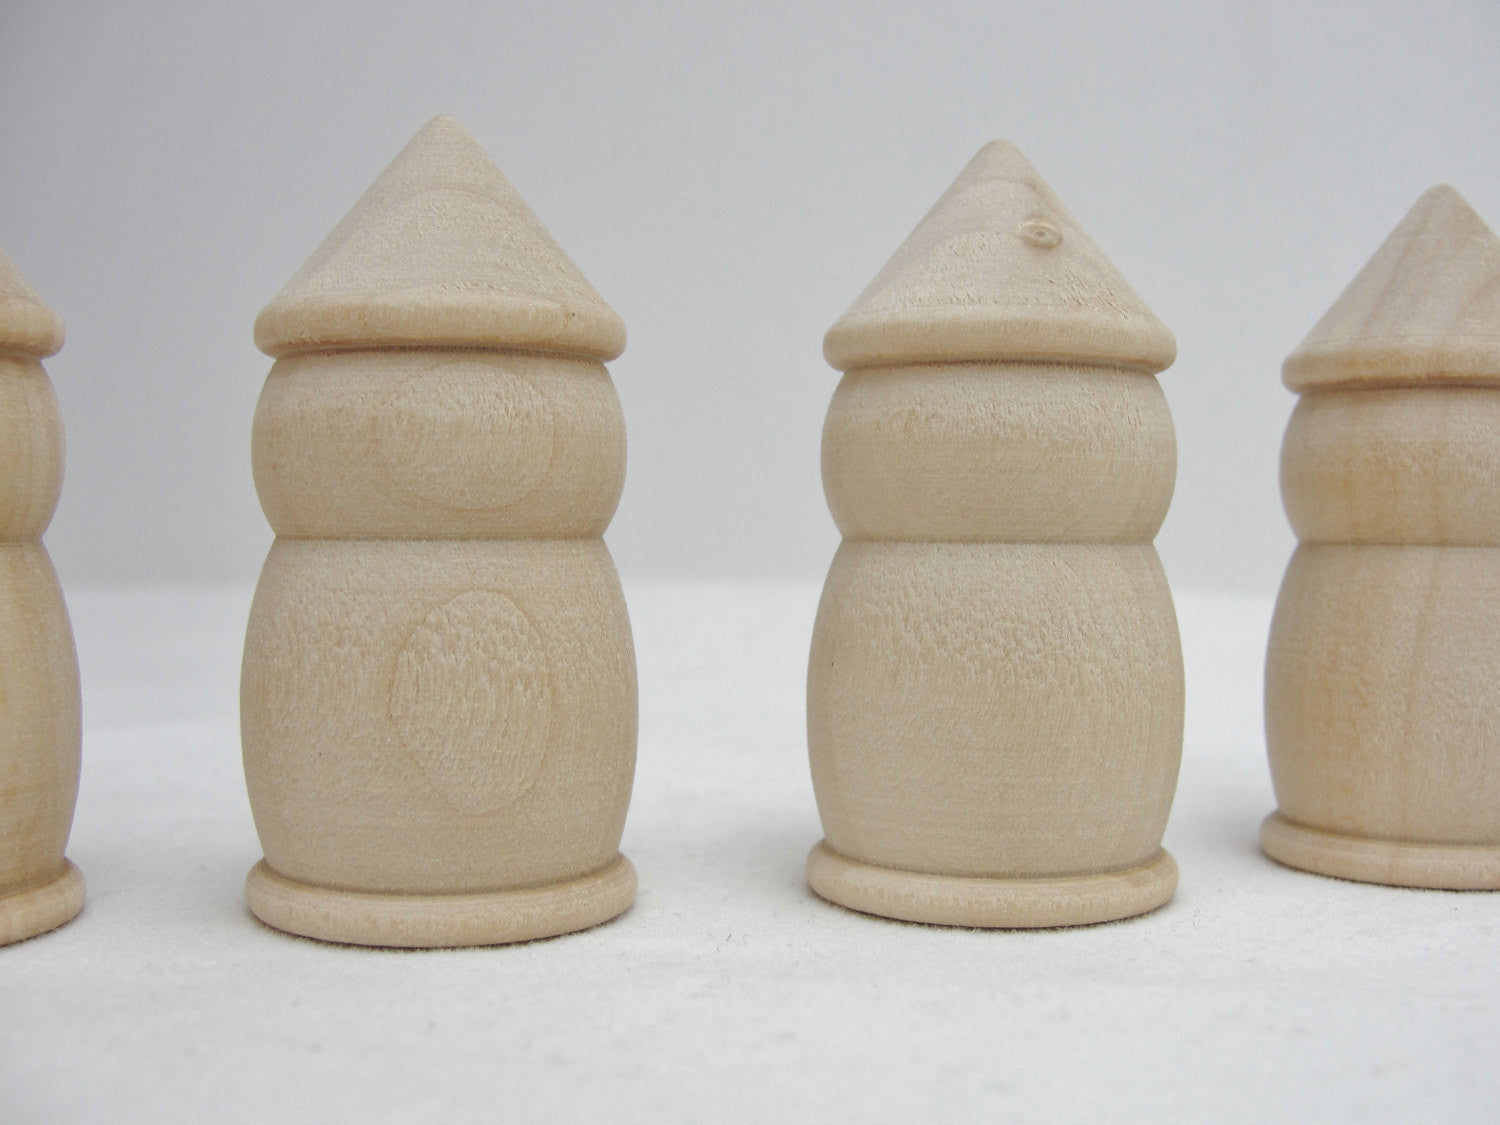 5 Wooden fairy garden gnomes people paint your own - Wood parts - Craft Supply House